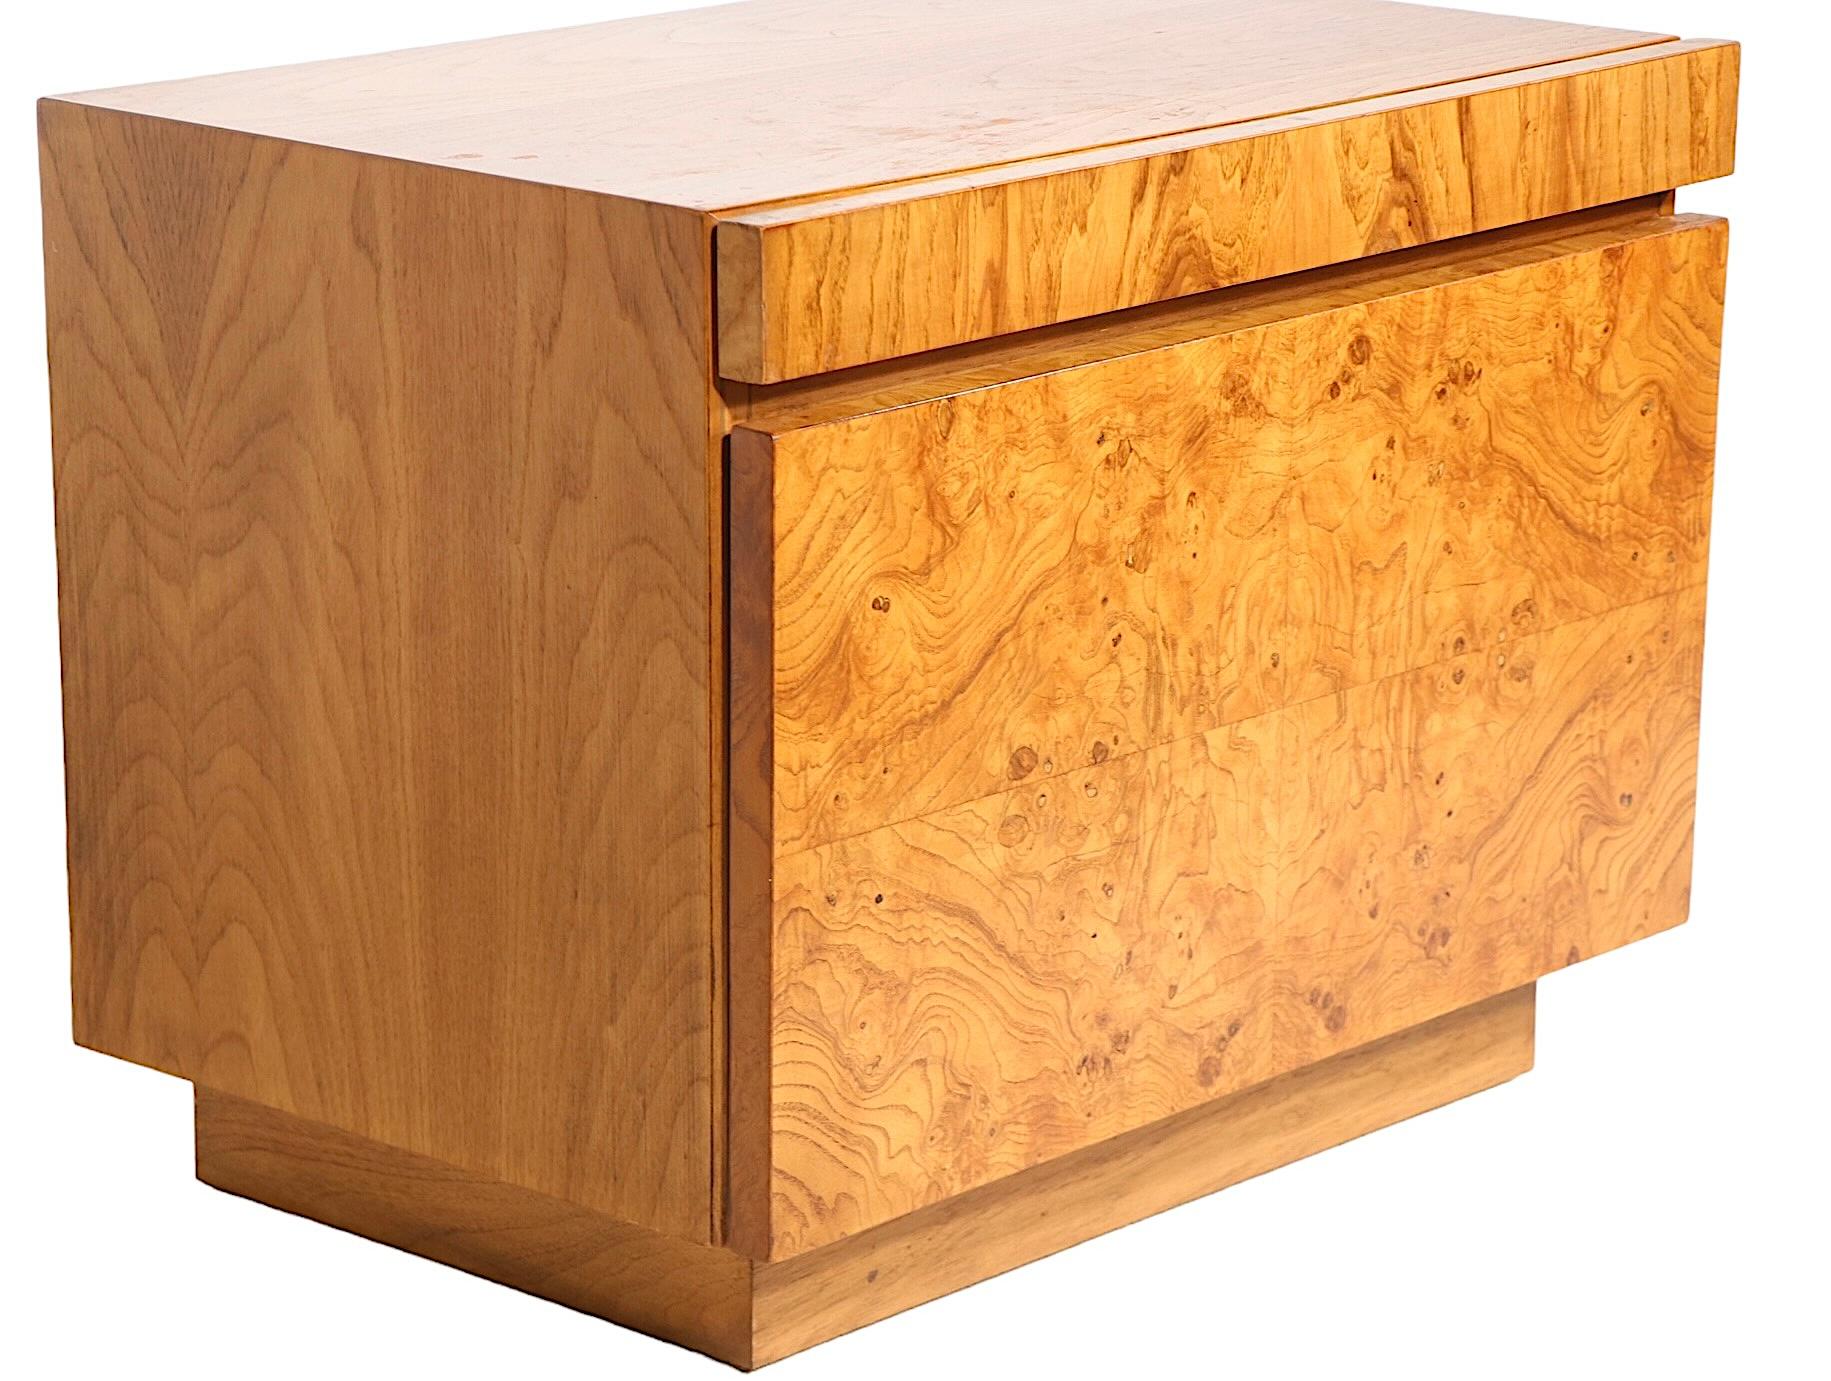 Exceptional pair of modernist night stands by Lane Alta Vista, design attributed to Milo Baughman, circa 1970's. The night tables feature  vibrant burl veneer drawer fronts,  rich walnut sides and top surfaces. Each case has a deep lower drawer